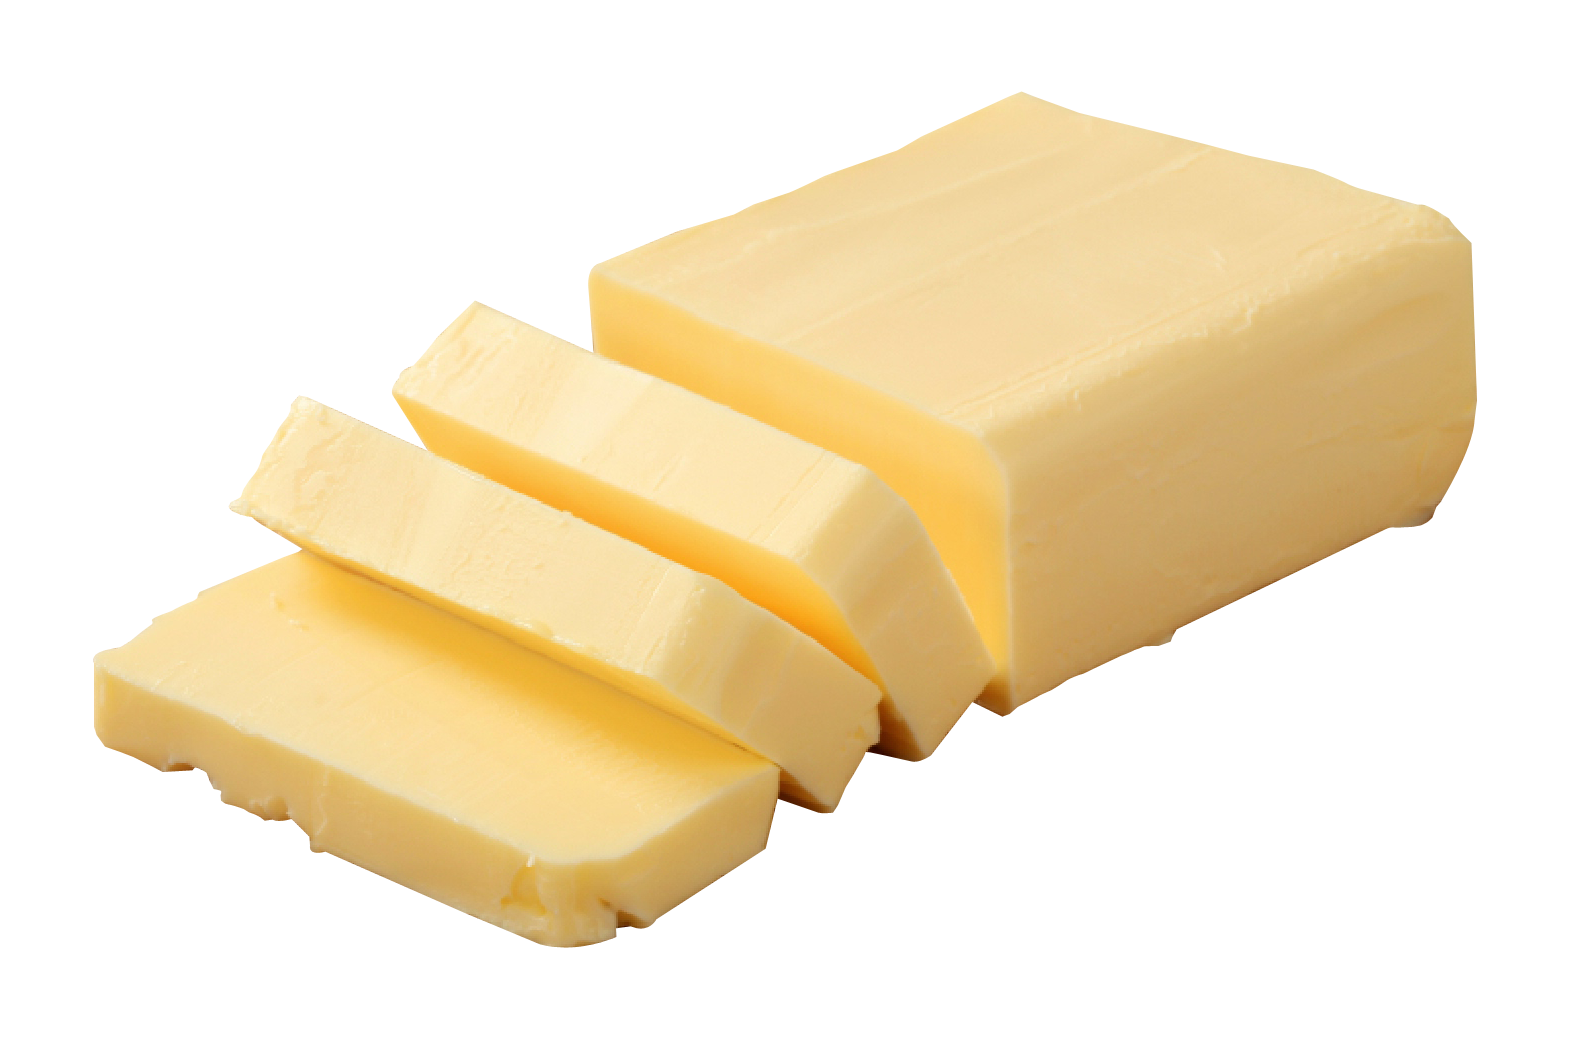 Butter Png Transparent Image   Butter Hd Png - Butter, Transparent background PNG HD thumbnail